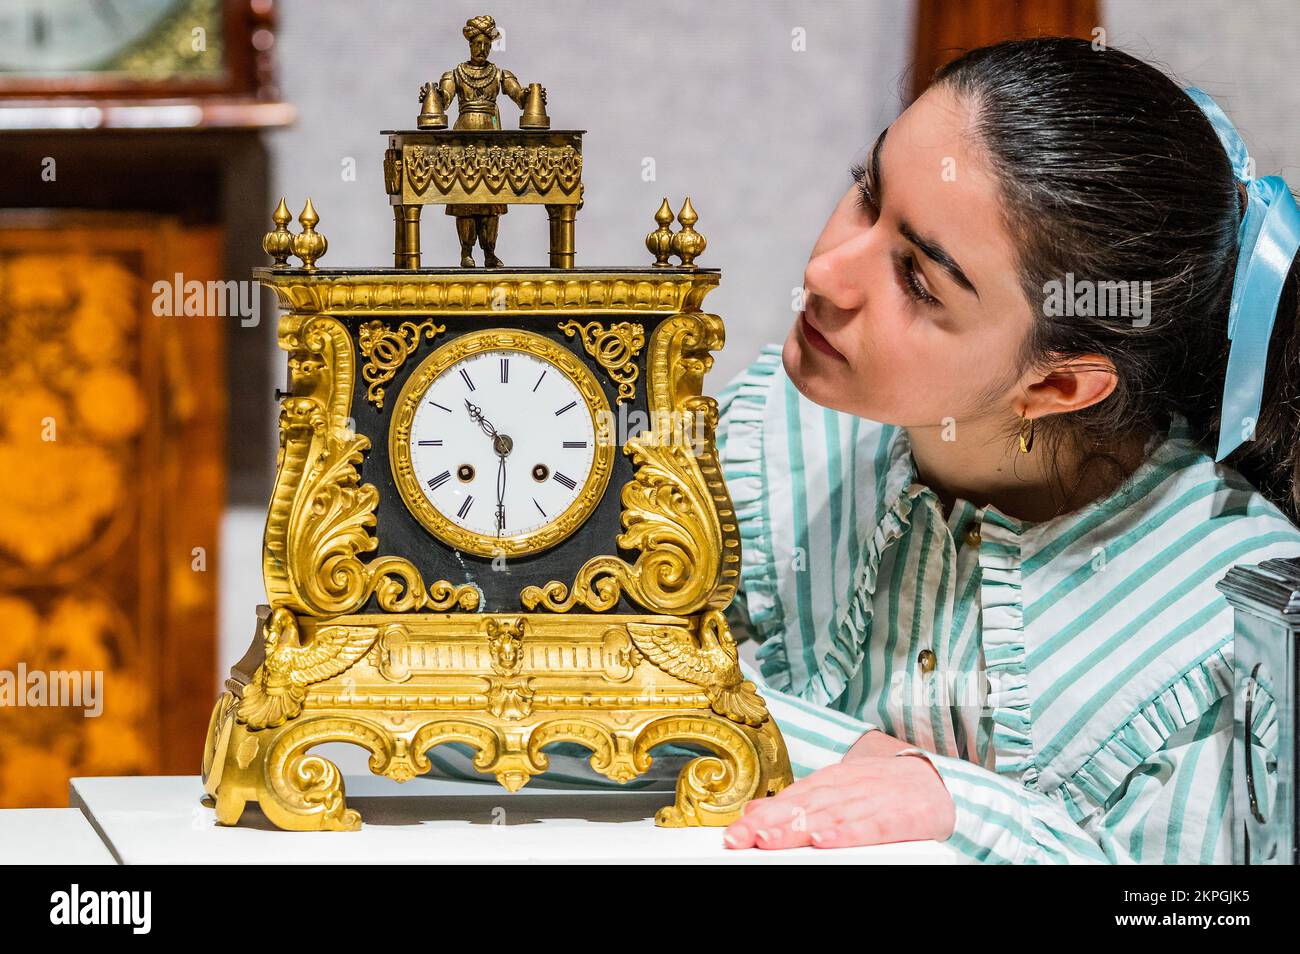 London, UK. 28th Nov, 2022. A rare second half of the 19th century automata novelty mystery 'Magician' mantel clock, The clock movement by Japy Freres, numbered 839, est £6,000 - £8,000. The magician, on top, is able to raise his arms and is articulated at the base of his neck in order to bow in acknowledgement of his performances and appears to make objecst appear and disappear - Preview of Fine Clocks sale at Bonhams New Bond Street, London. Credit: Guy Bell/Alamy Live News Stock Photo